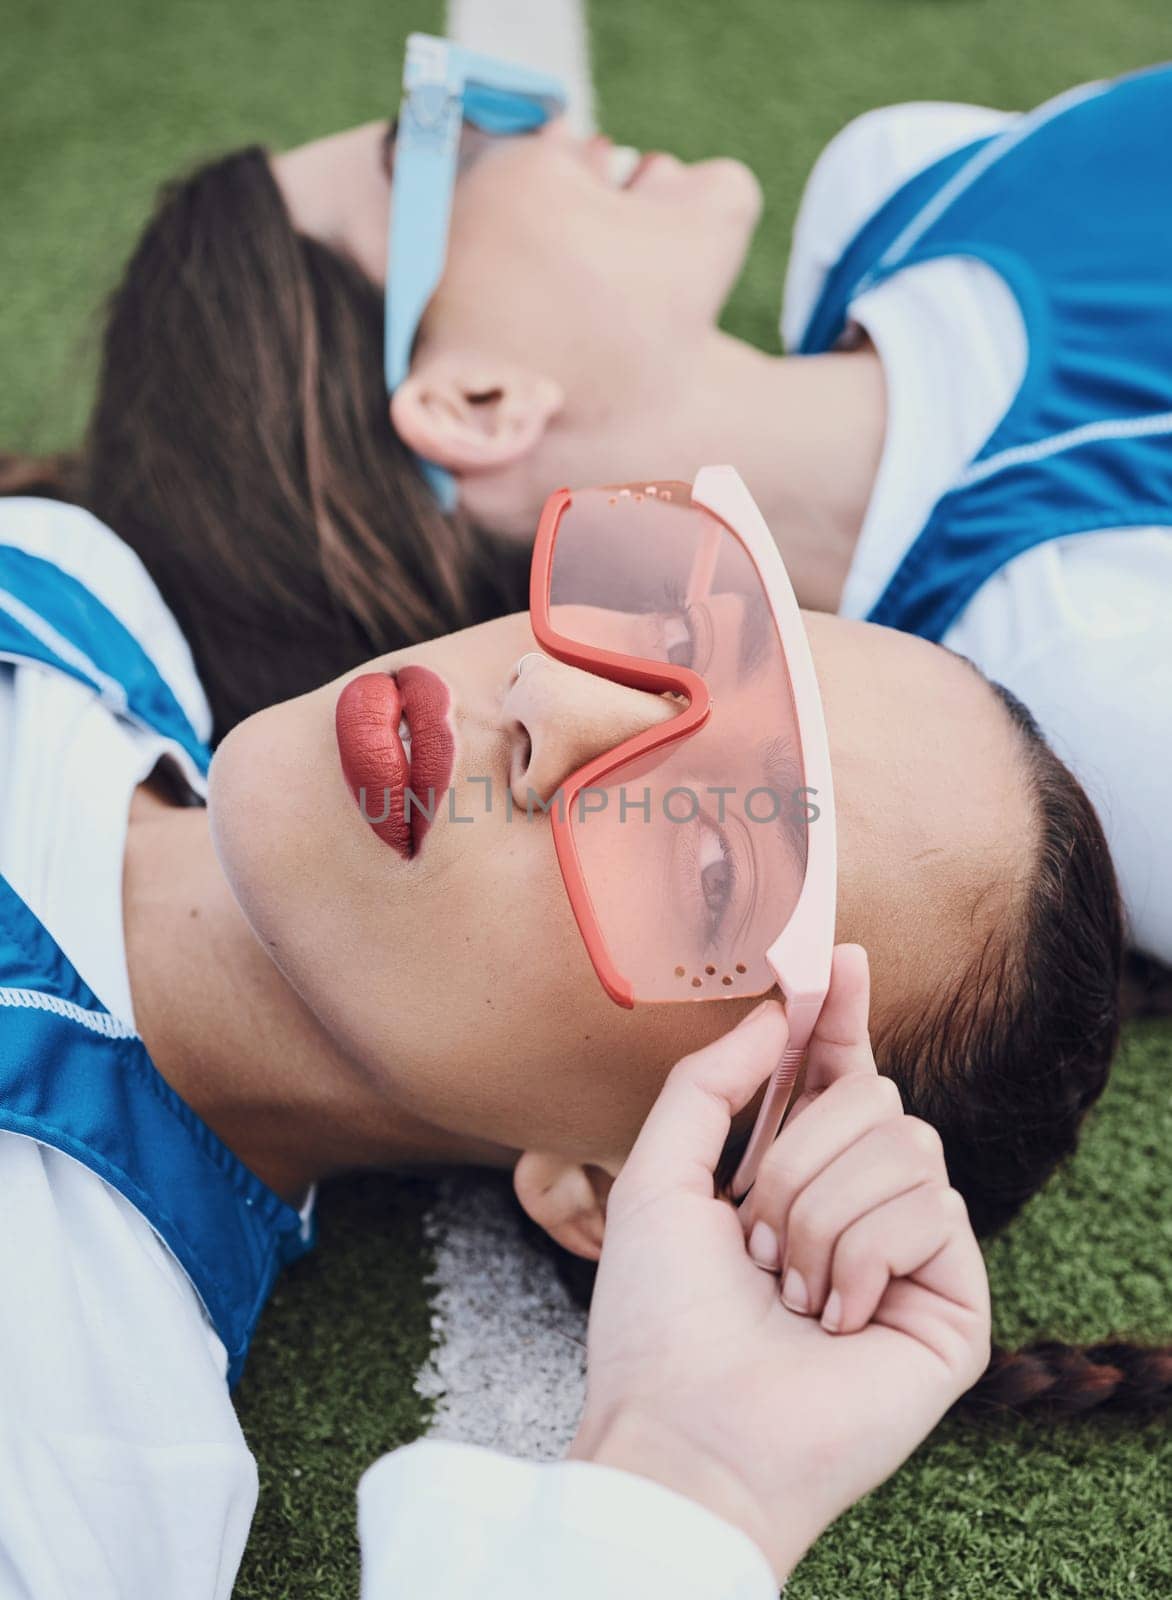 Women, portrait and athlete with fashion sunglasses for edgy styling, cosmetics and makeup in trendy eyewear. Athletes, sports field and sportswear on ground, teammates and cool posing with friend.